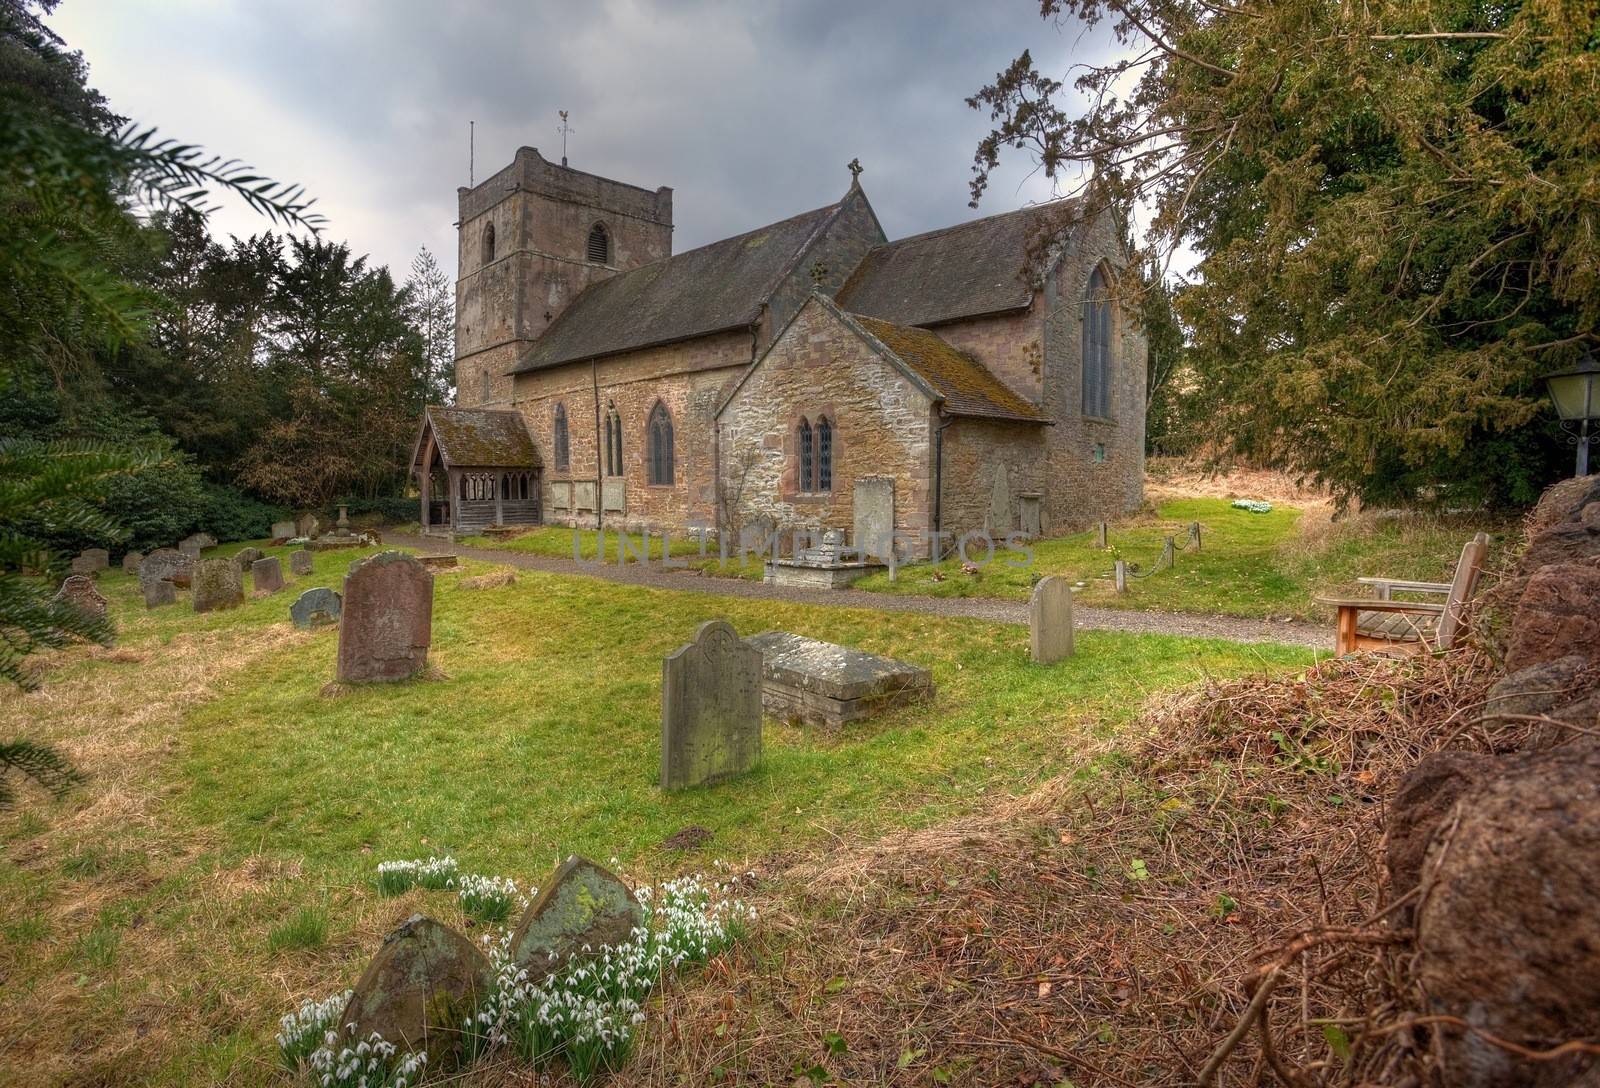 The historic parish church of St Michael at Munslow in Corvedale, Shropshire, England.